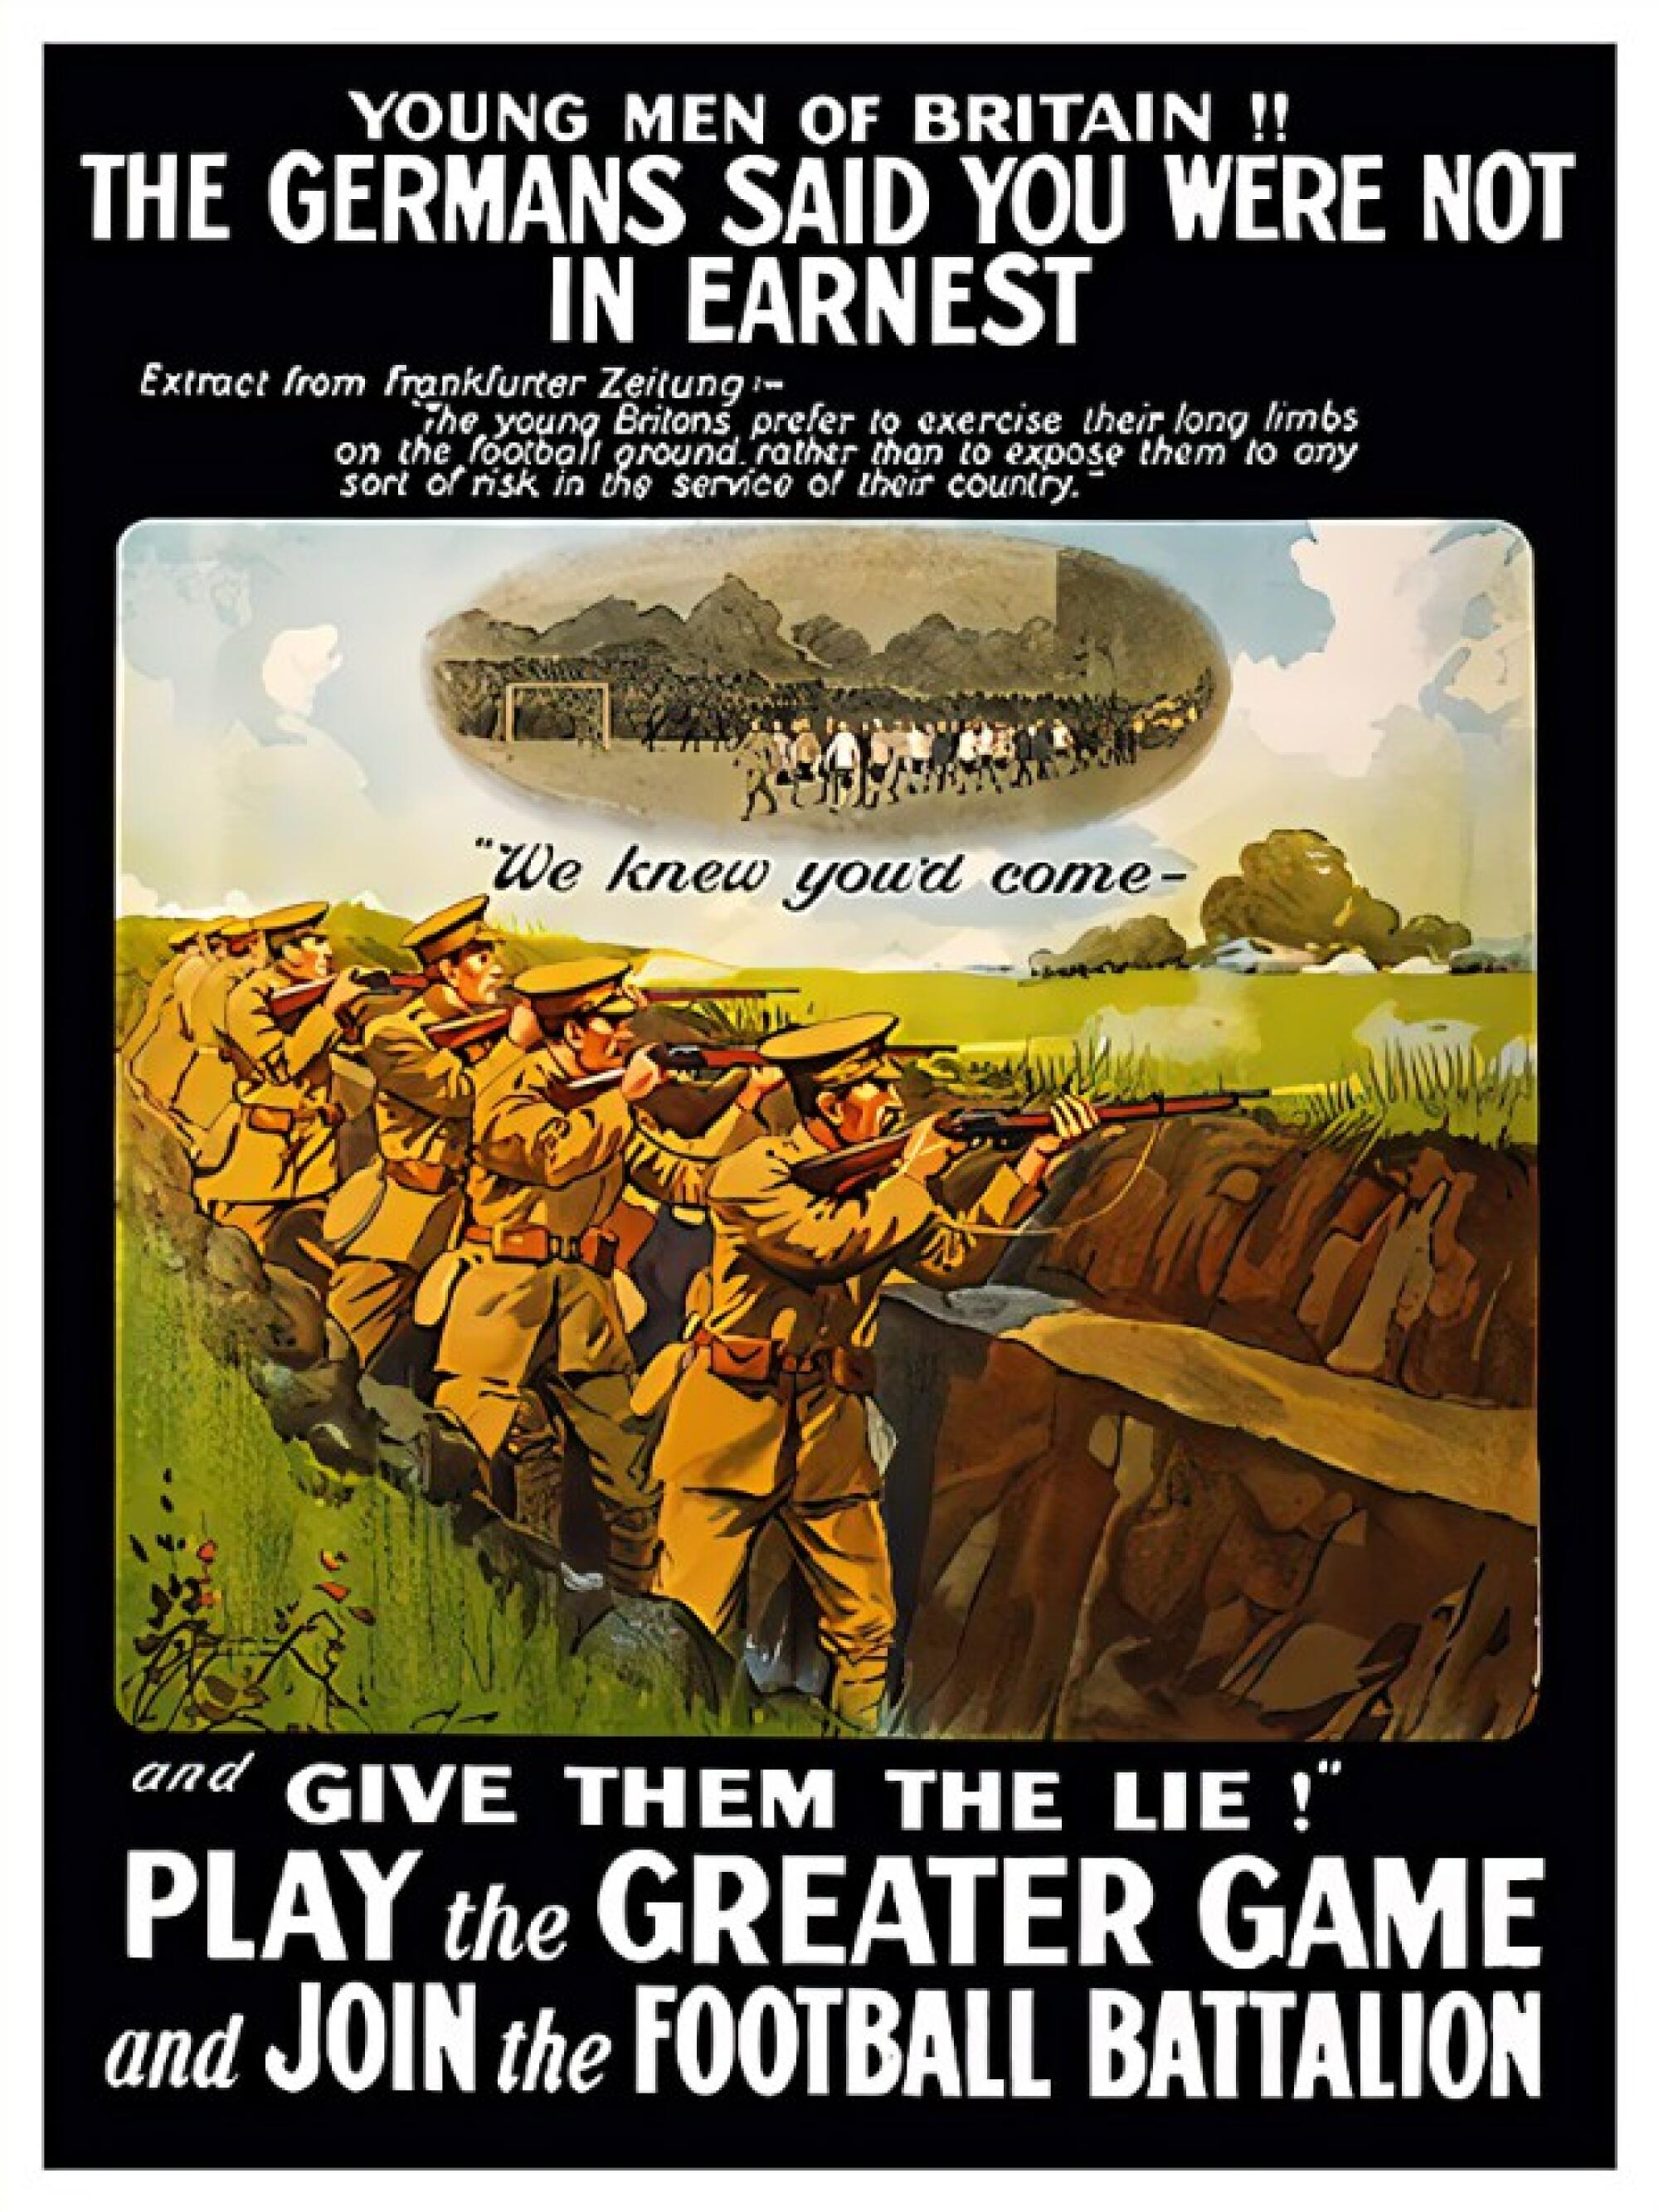 A British World War I recruiting poster urges soccer players to join the military to defend their country 